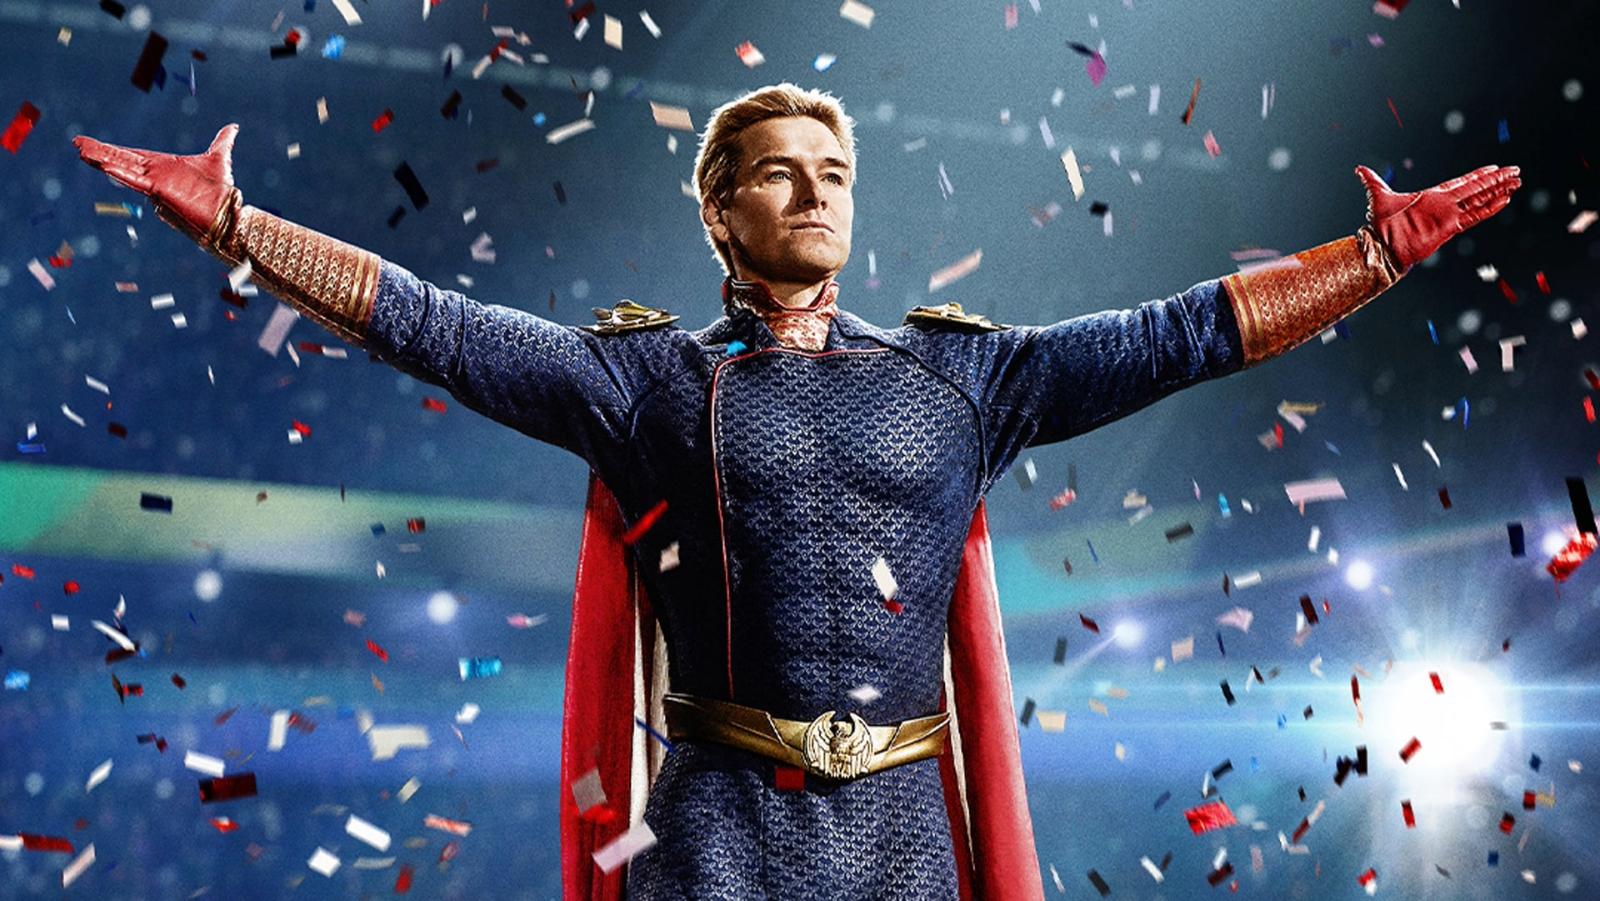 Antony Starr as Homelander in The Boys surrounded by confetti